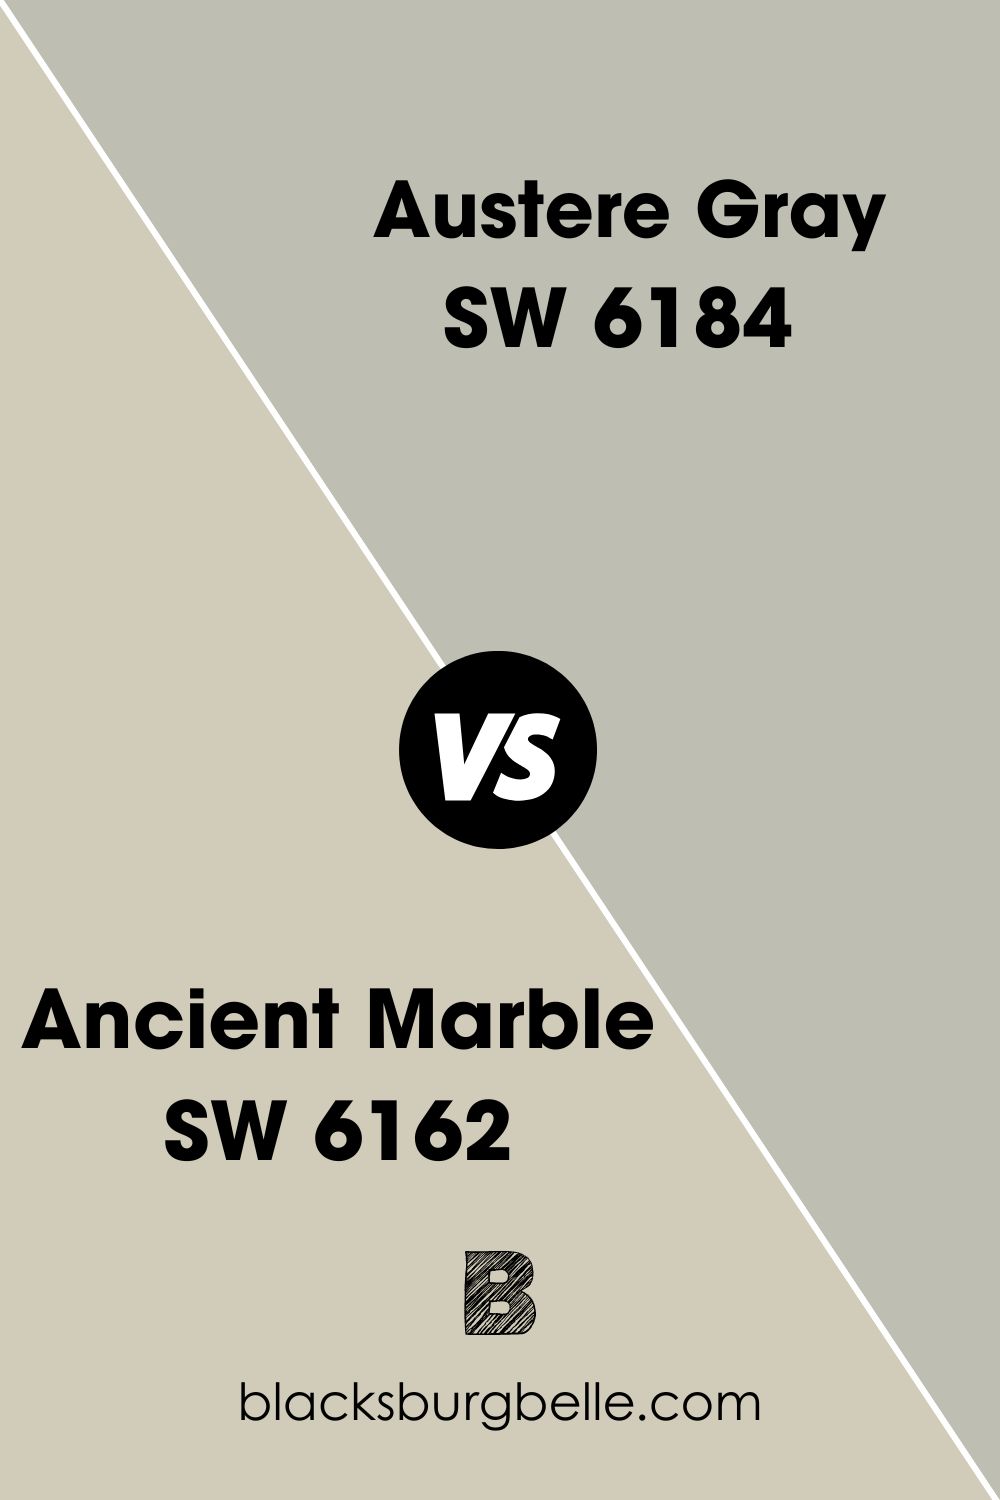 Ancient Marble SW 6162